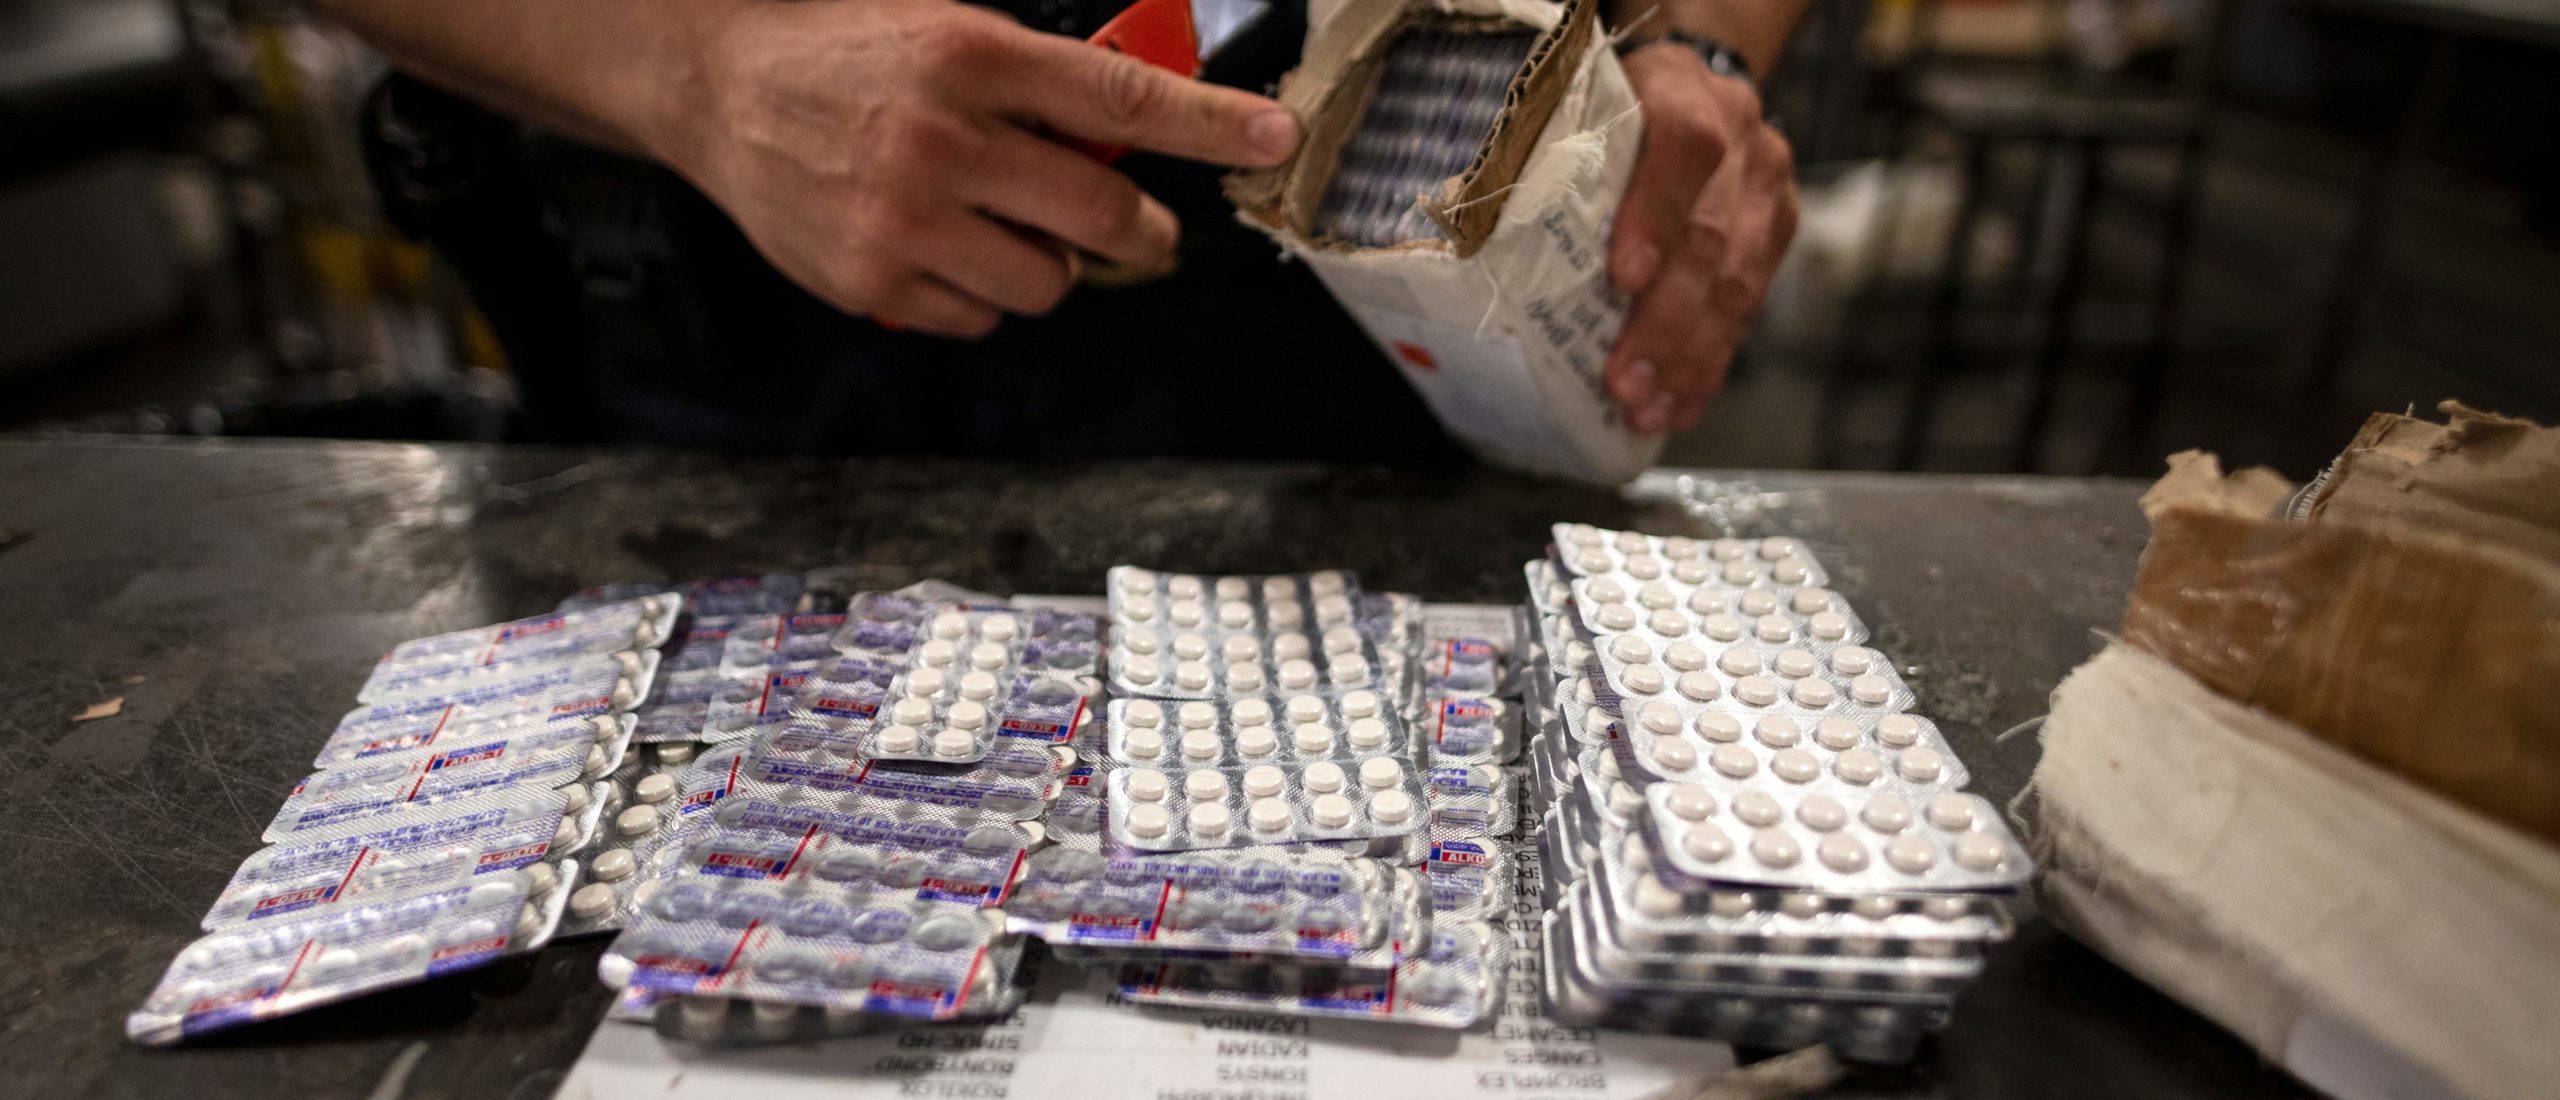 An officer from the US Customs and Border Protection, Trade and Cargo Division finds Oxycodon pills in a parcel at John F. Kennedy Airport's US Postal Service facility on June 24, 2019 in New York. (Photo by JOHANNES EISELE/AFP via Getty Images)